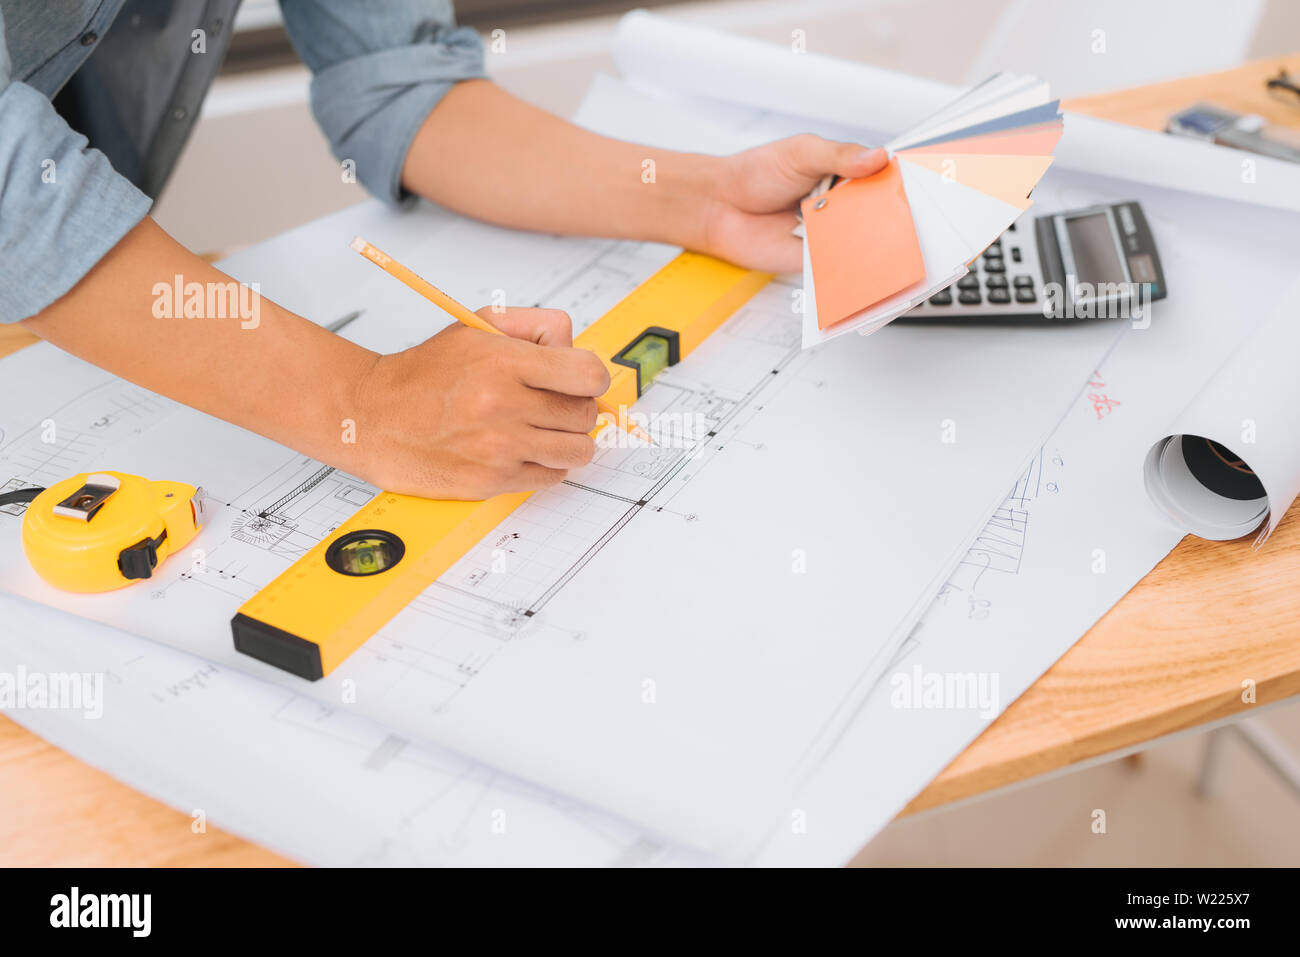 Workplace items tools for project, Architect or Engineer working on blueprint for architectural project in progress, construction and structure concep Stock Photo